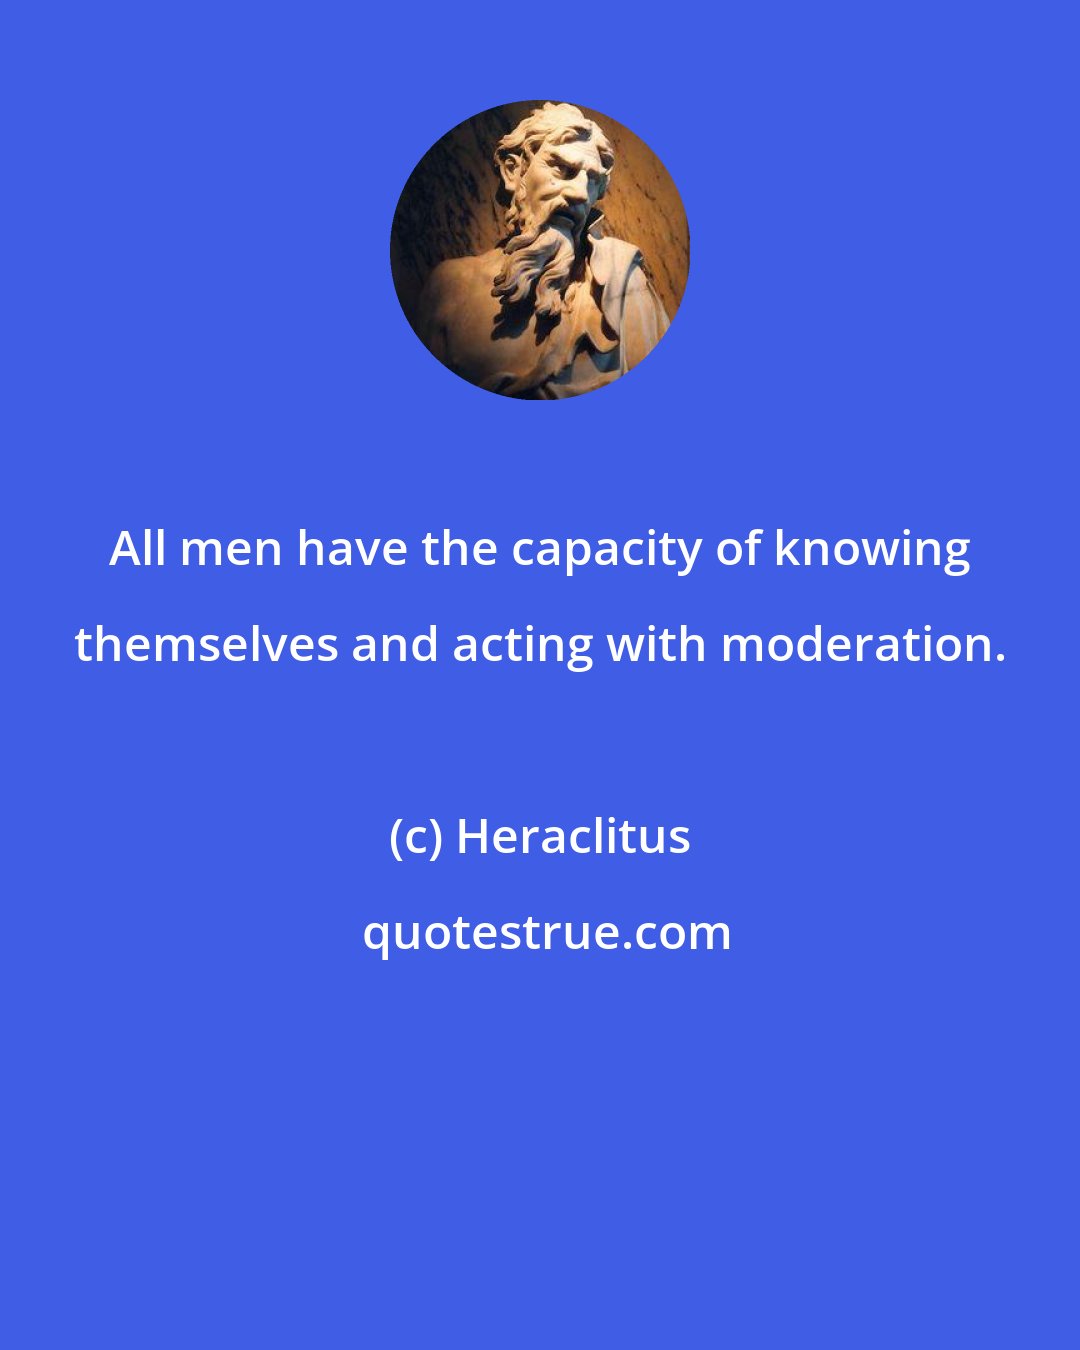 Heraclitus: All men have the capacity of knowing themselves and acting with moderation.